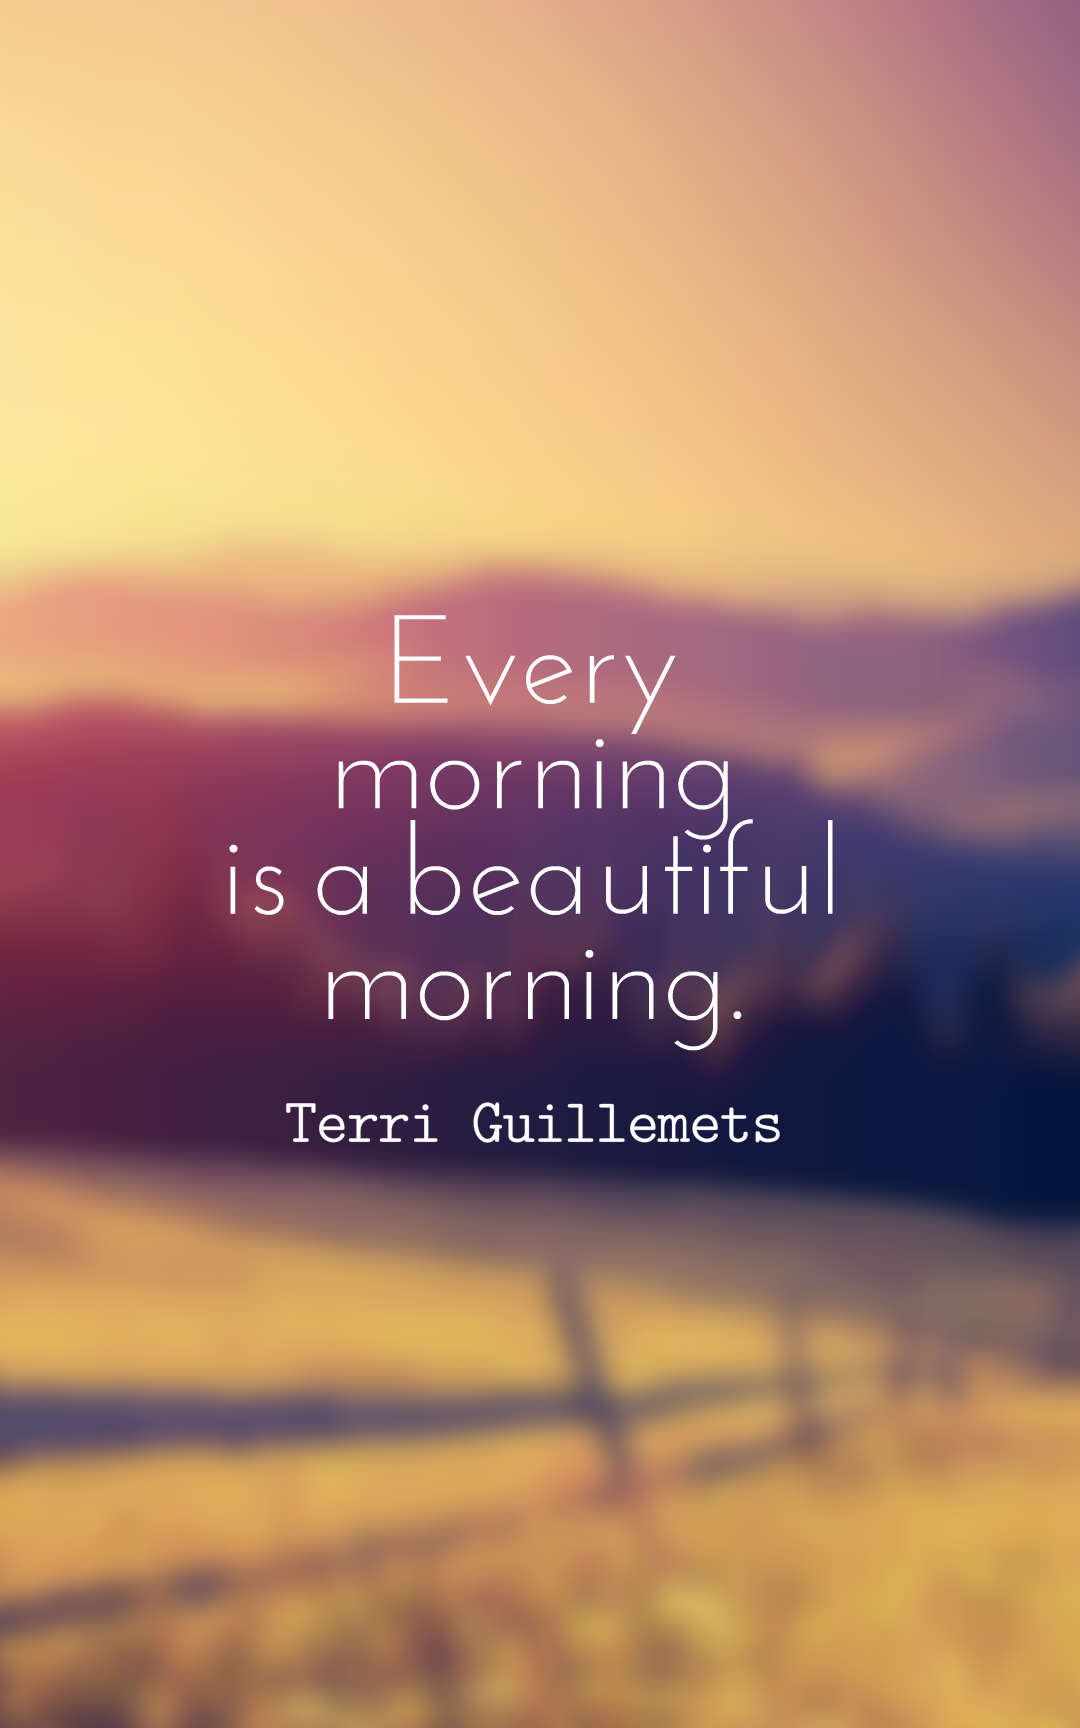 Every morning is a beautiful morning.